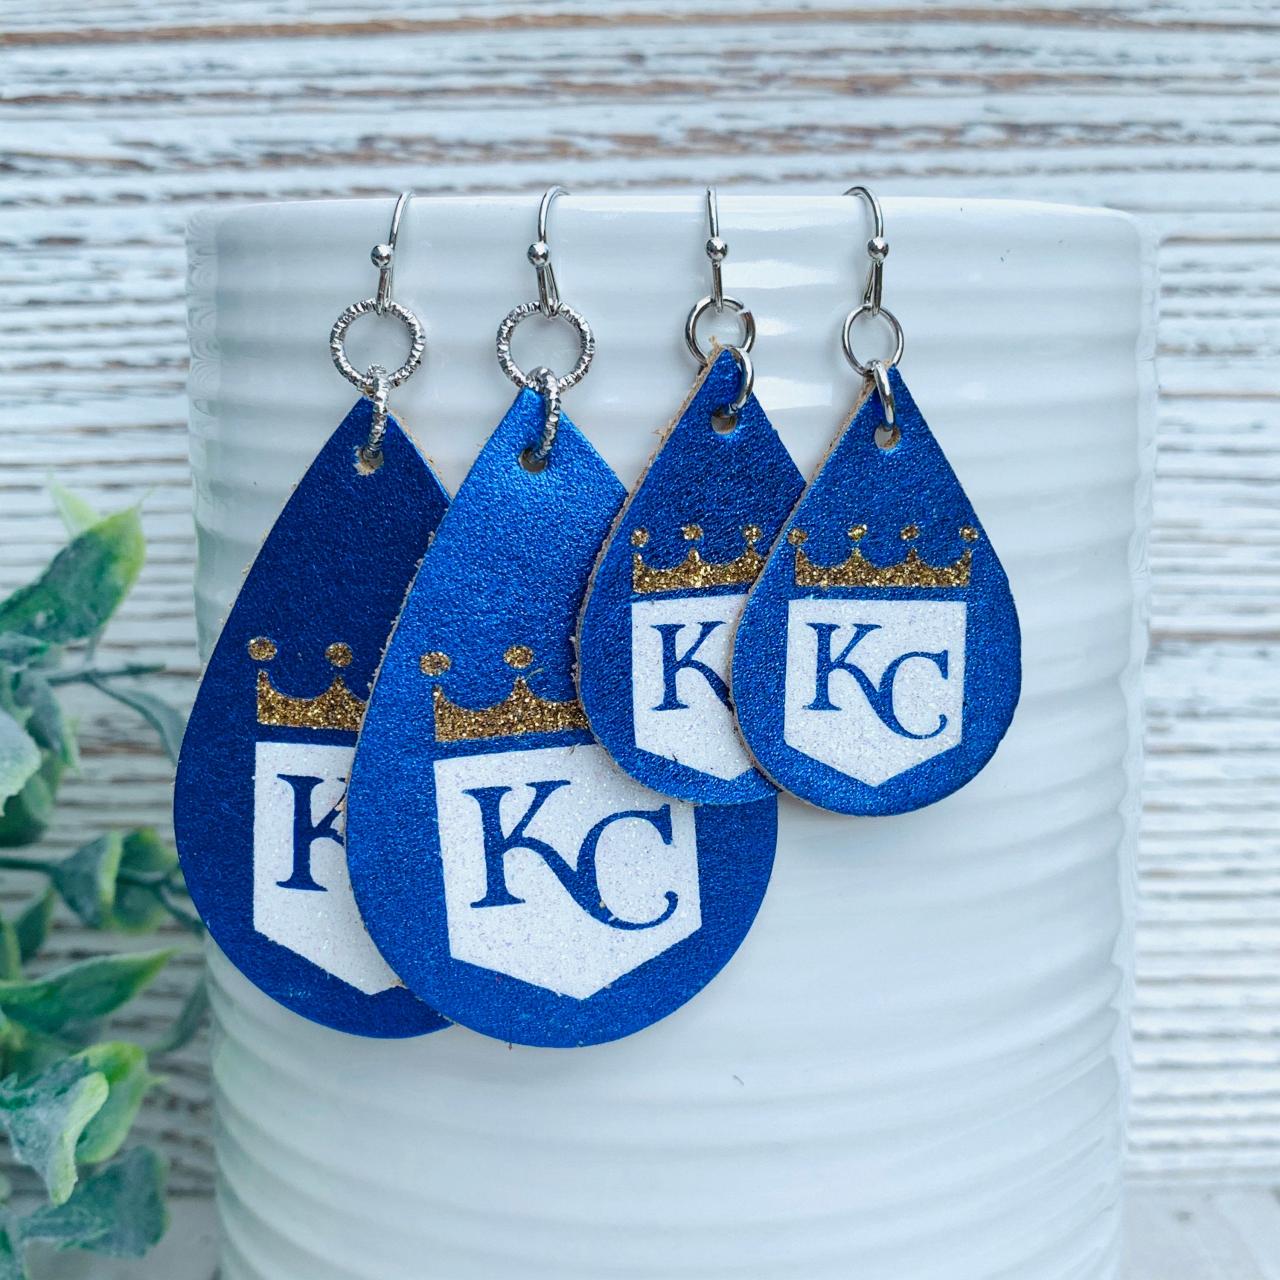 Cute Leather Earrings | Kc Royals Leather Earrings | Kc Leather Earrings | Teardrop Earrings | Baseball Leather Earrings | Genuine Leather